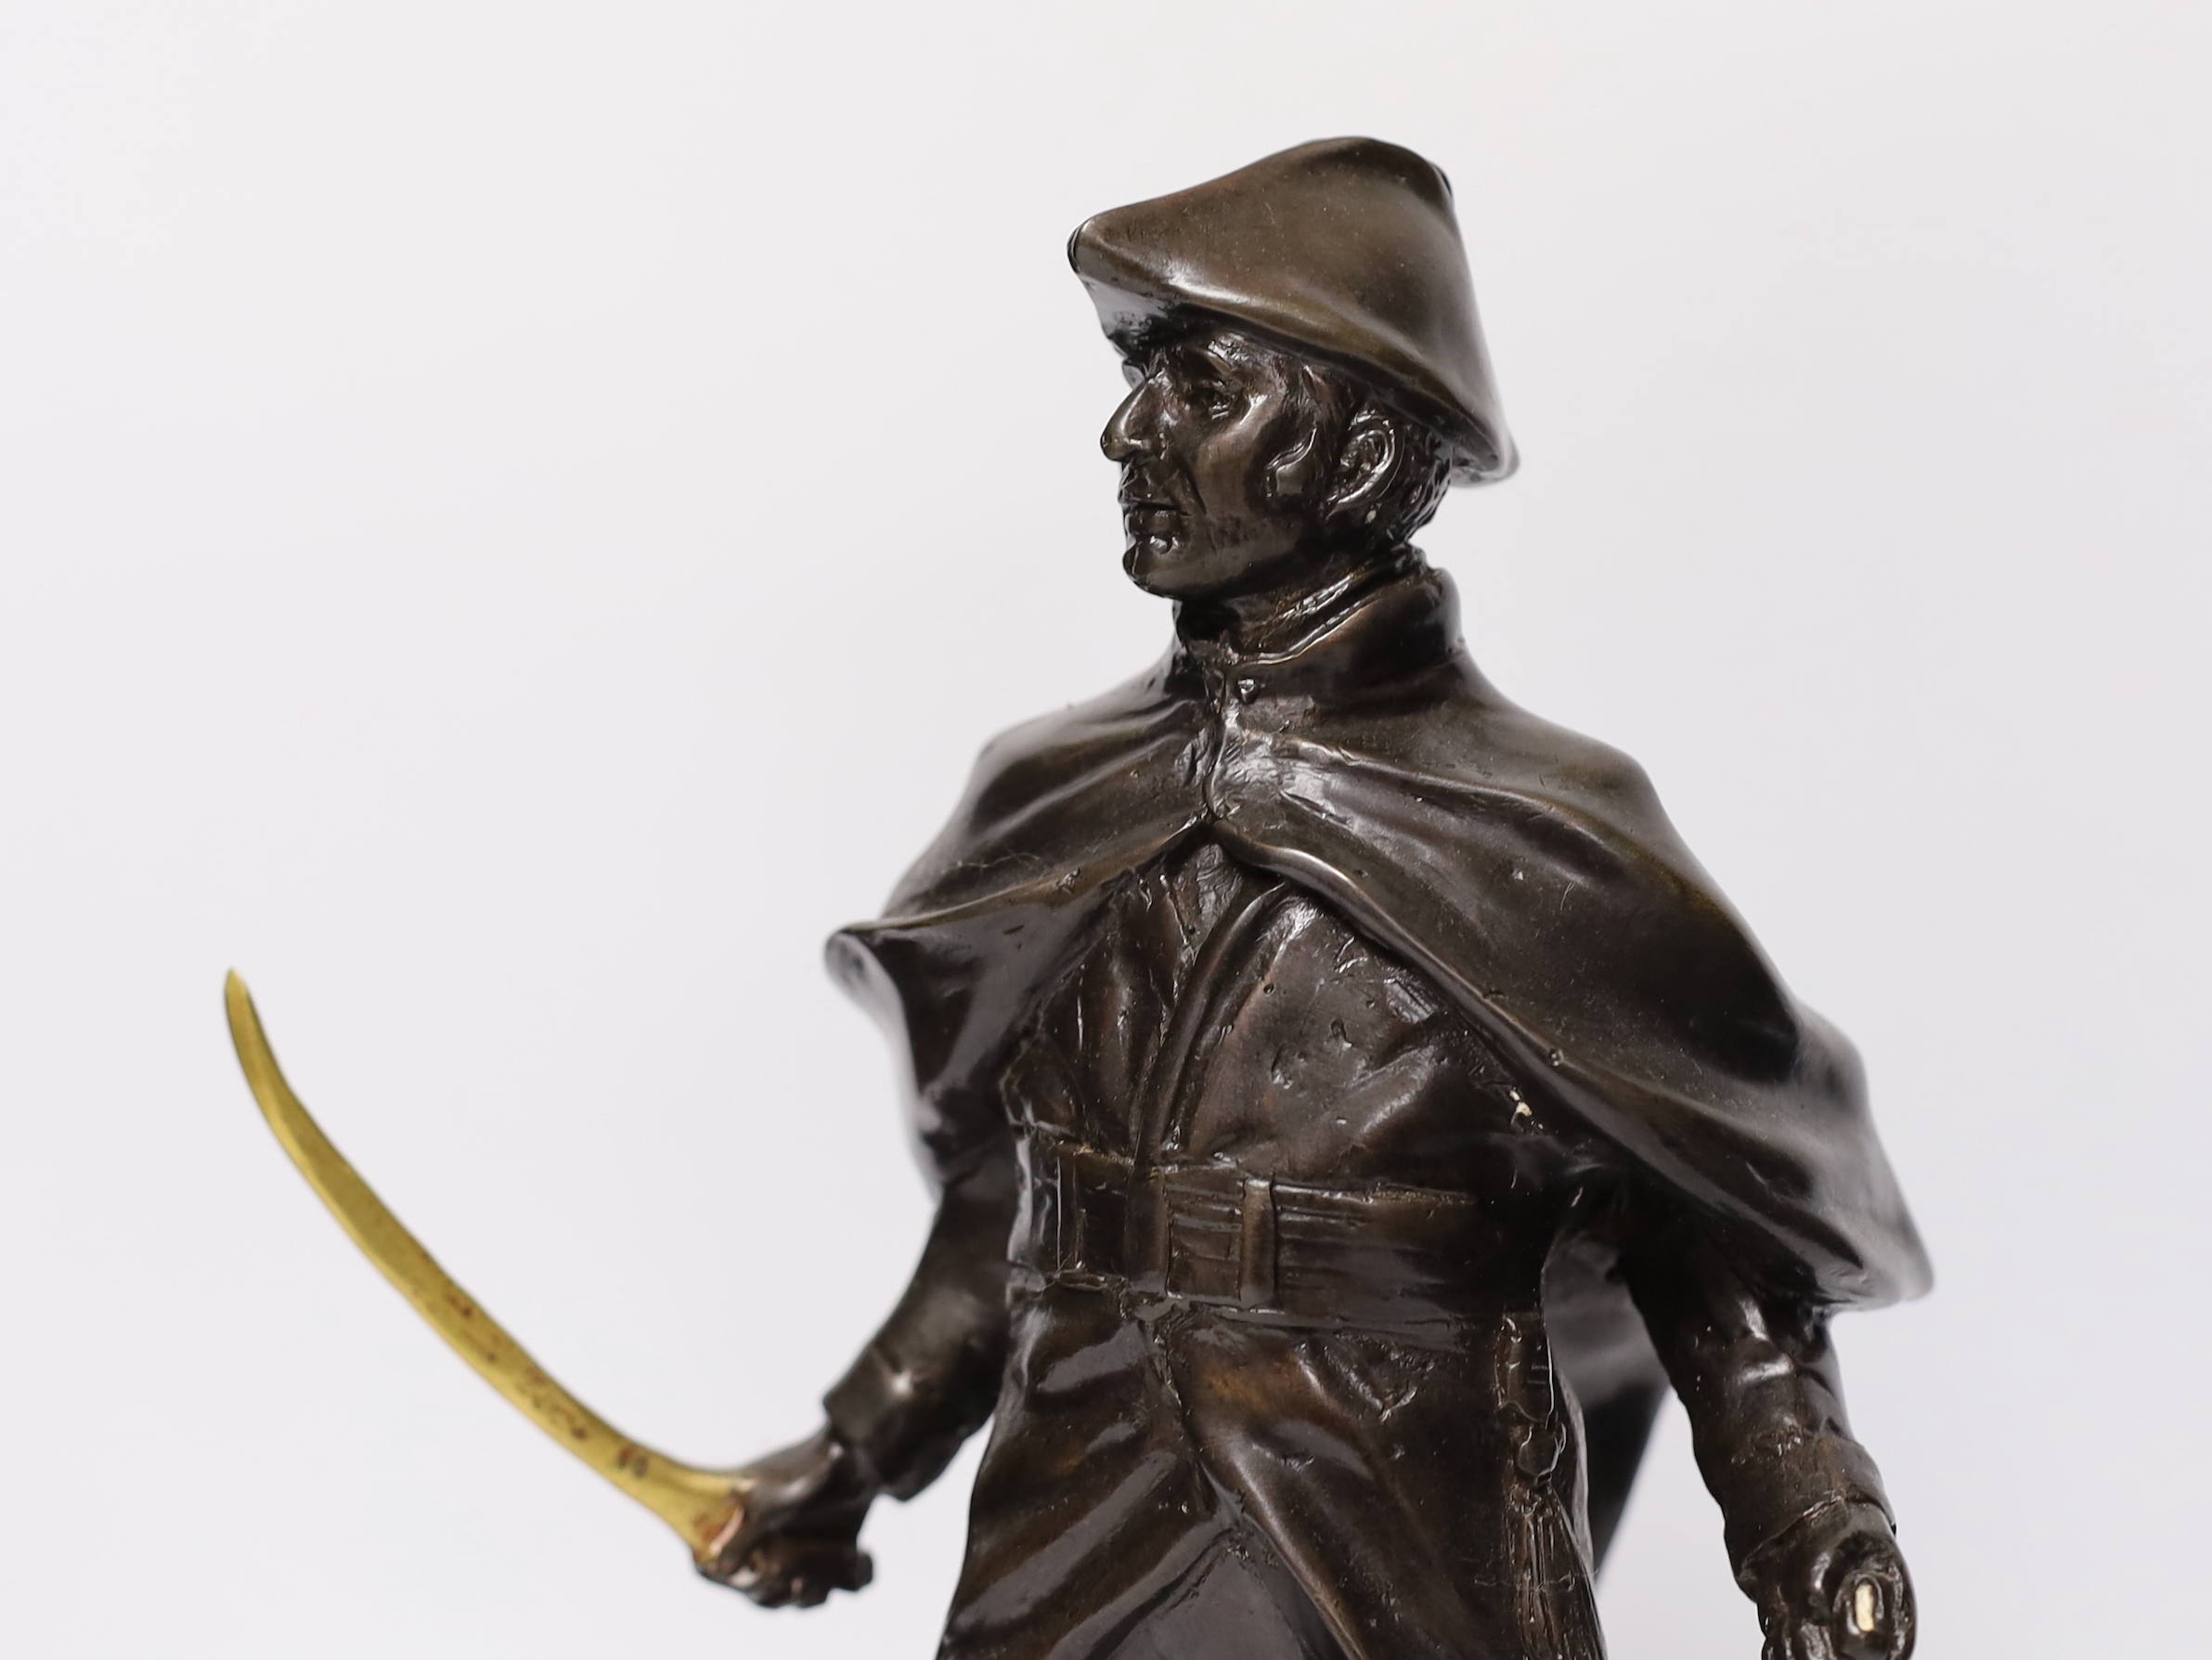 A bronze figure of Wellington with brass sword blade and cannon, signed ‘Boucher’, mounted on a marble base, 34cm